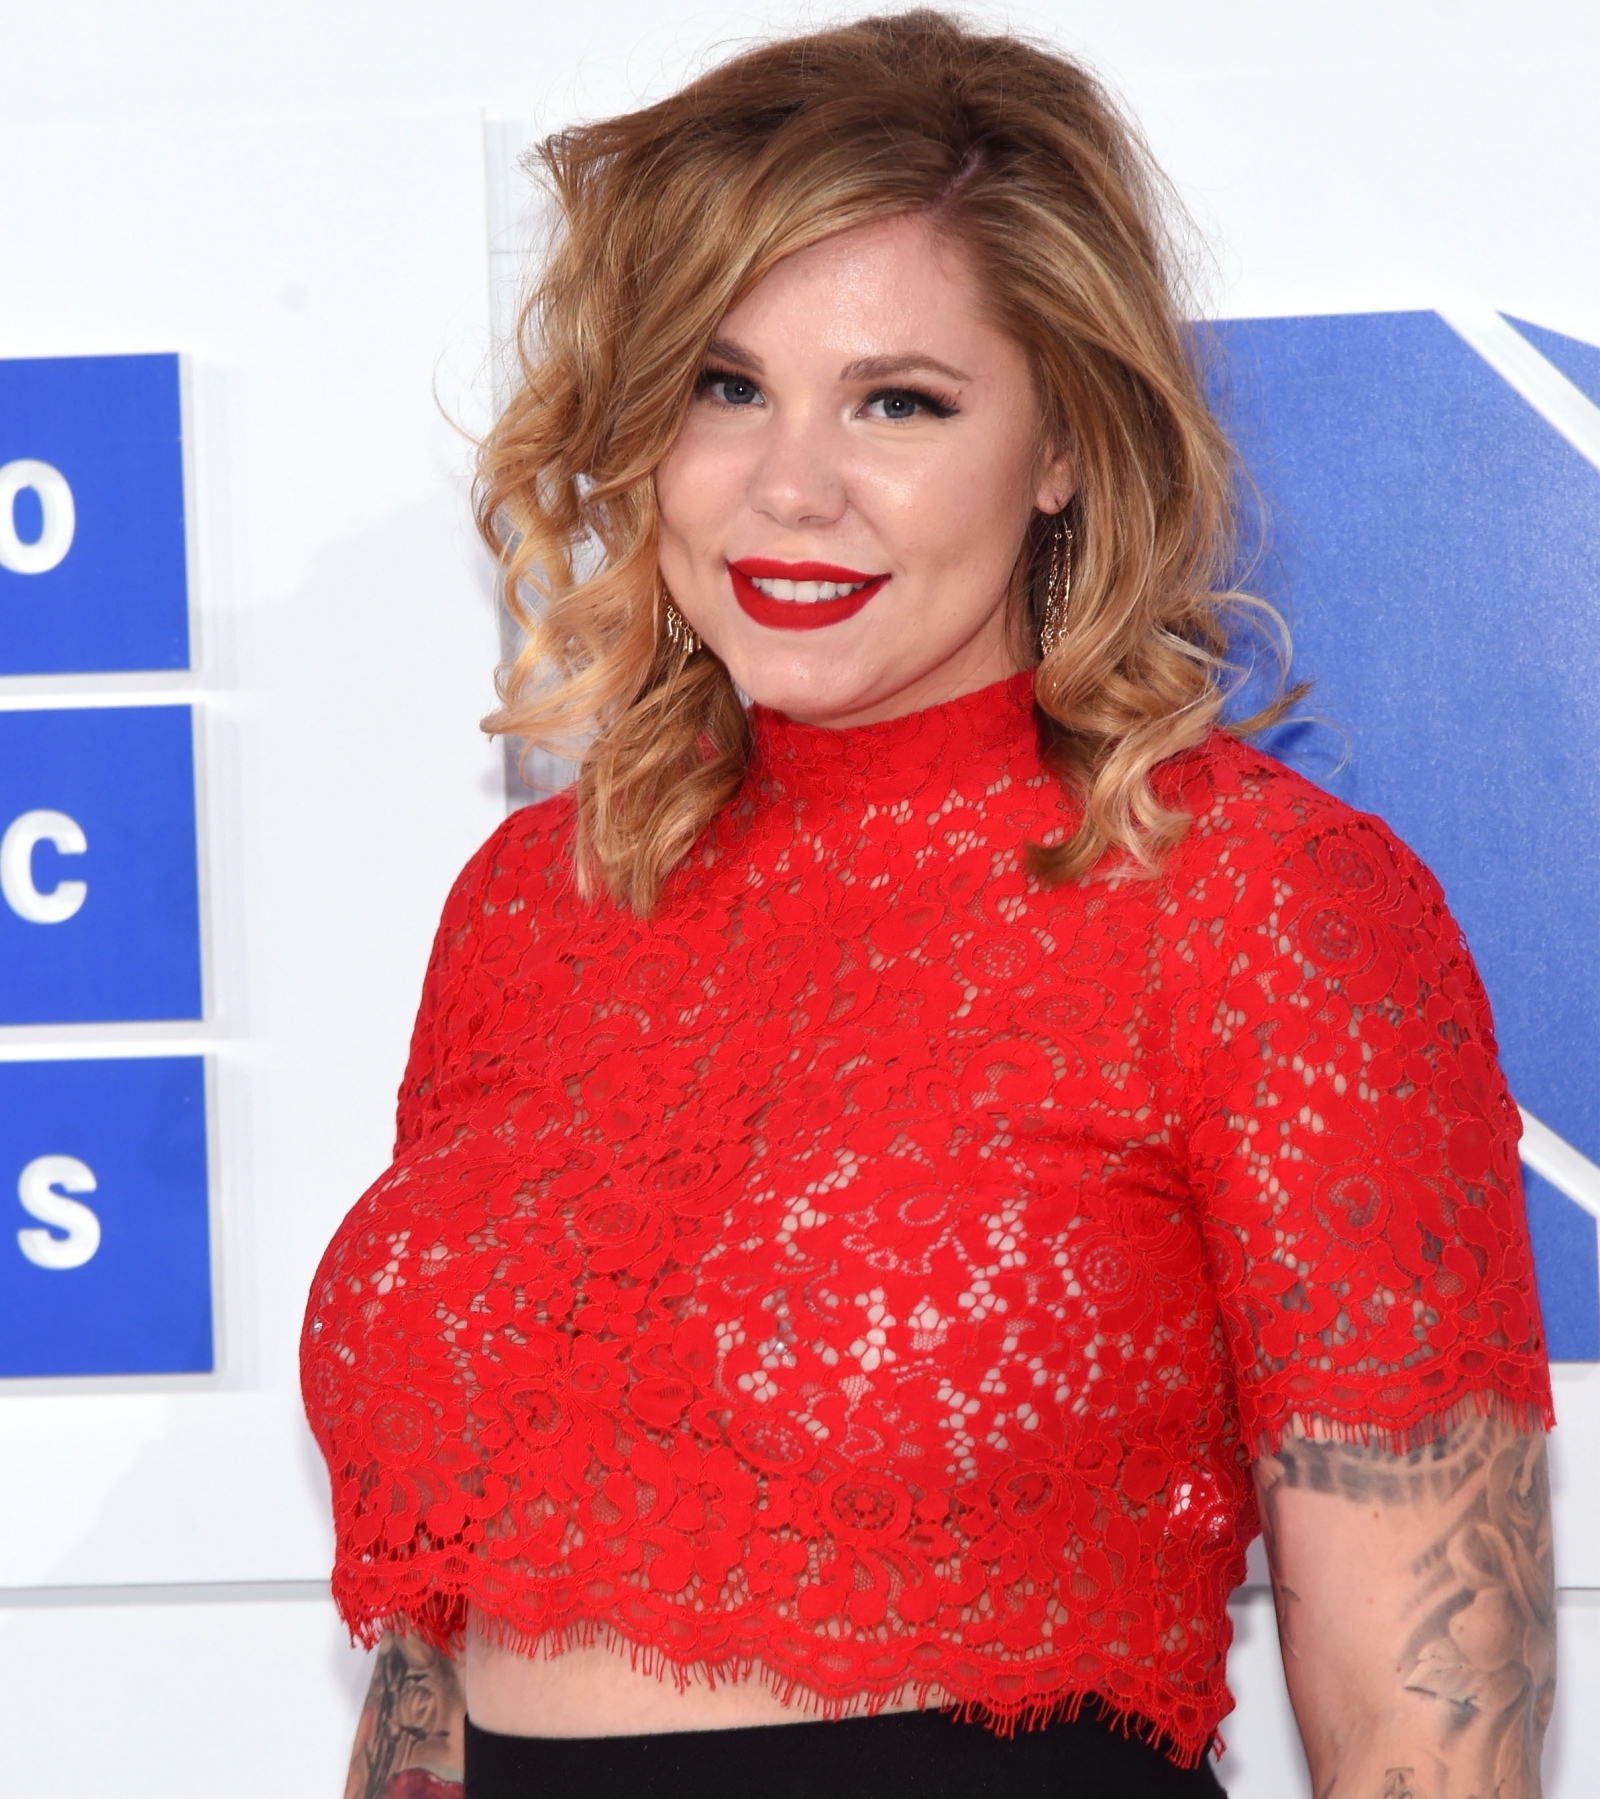 Kailyn Lowry Shares Nude Instagram From Jamaica Vacation